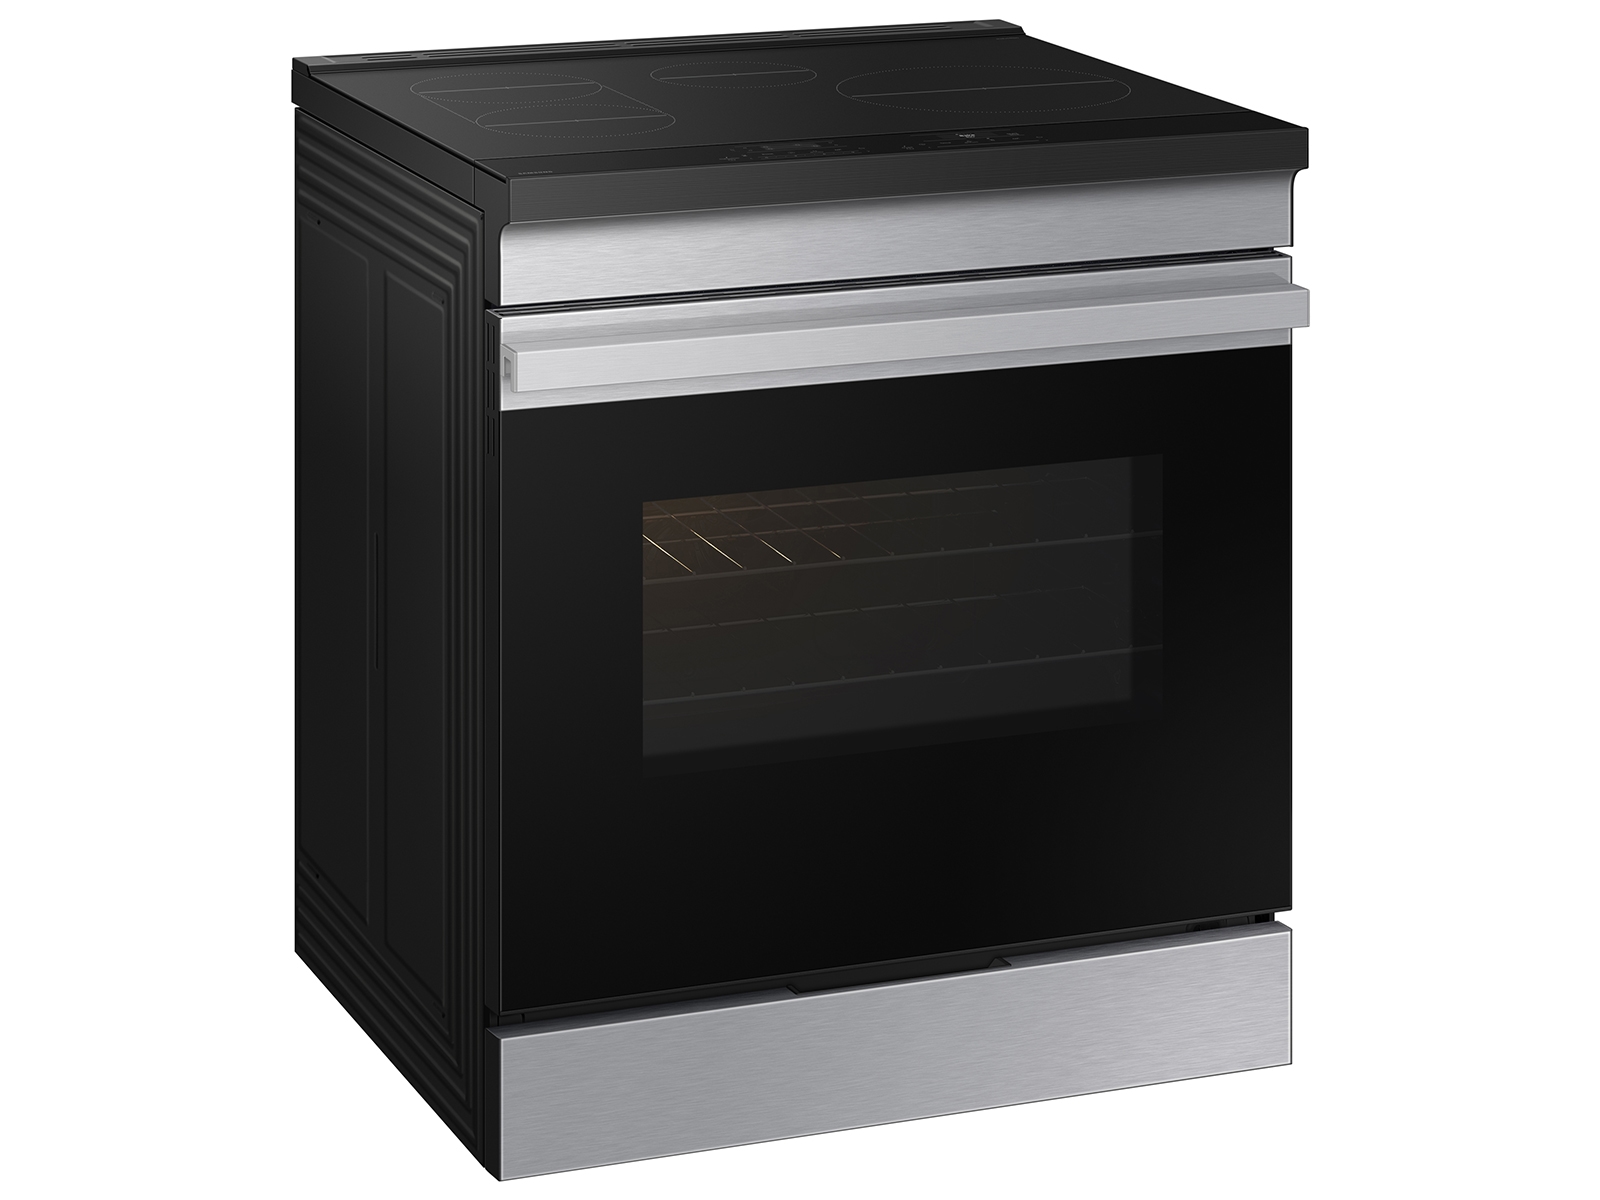 Thumbnail image of Bespoke 6.3 cu. ft. Smart Slide-In Induction Range with Anti-Scratch Glass Cooktop &amp; Air Fry in Stainless Steel